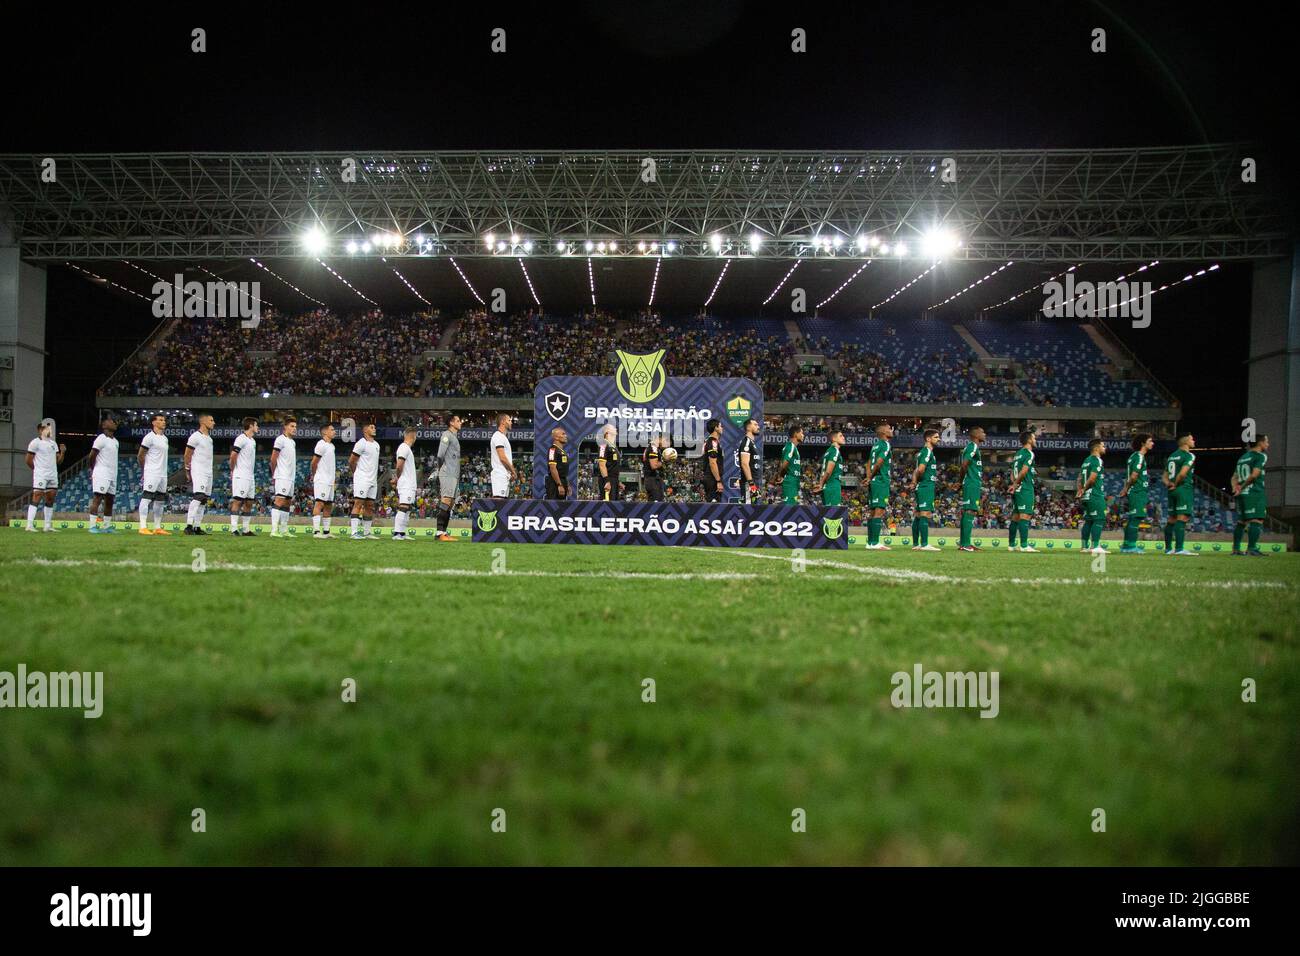 Cuiaba, Brazil. 10th July, 2022. MT - Cuiaba - 07/10/2022 - BRAZILIAN A 2022, CUIABA X BOTAFOGO - Players from Cuiaba and Botafogo pose for photos next to the referee before the match at the Arena Pantanal stadium for the Brazilian championship A 2022. Photo: Gil Gomes/AGIF/Sipa USA Credit: Sipa USA/Alamy Live News Stock Photo